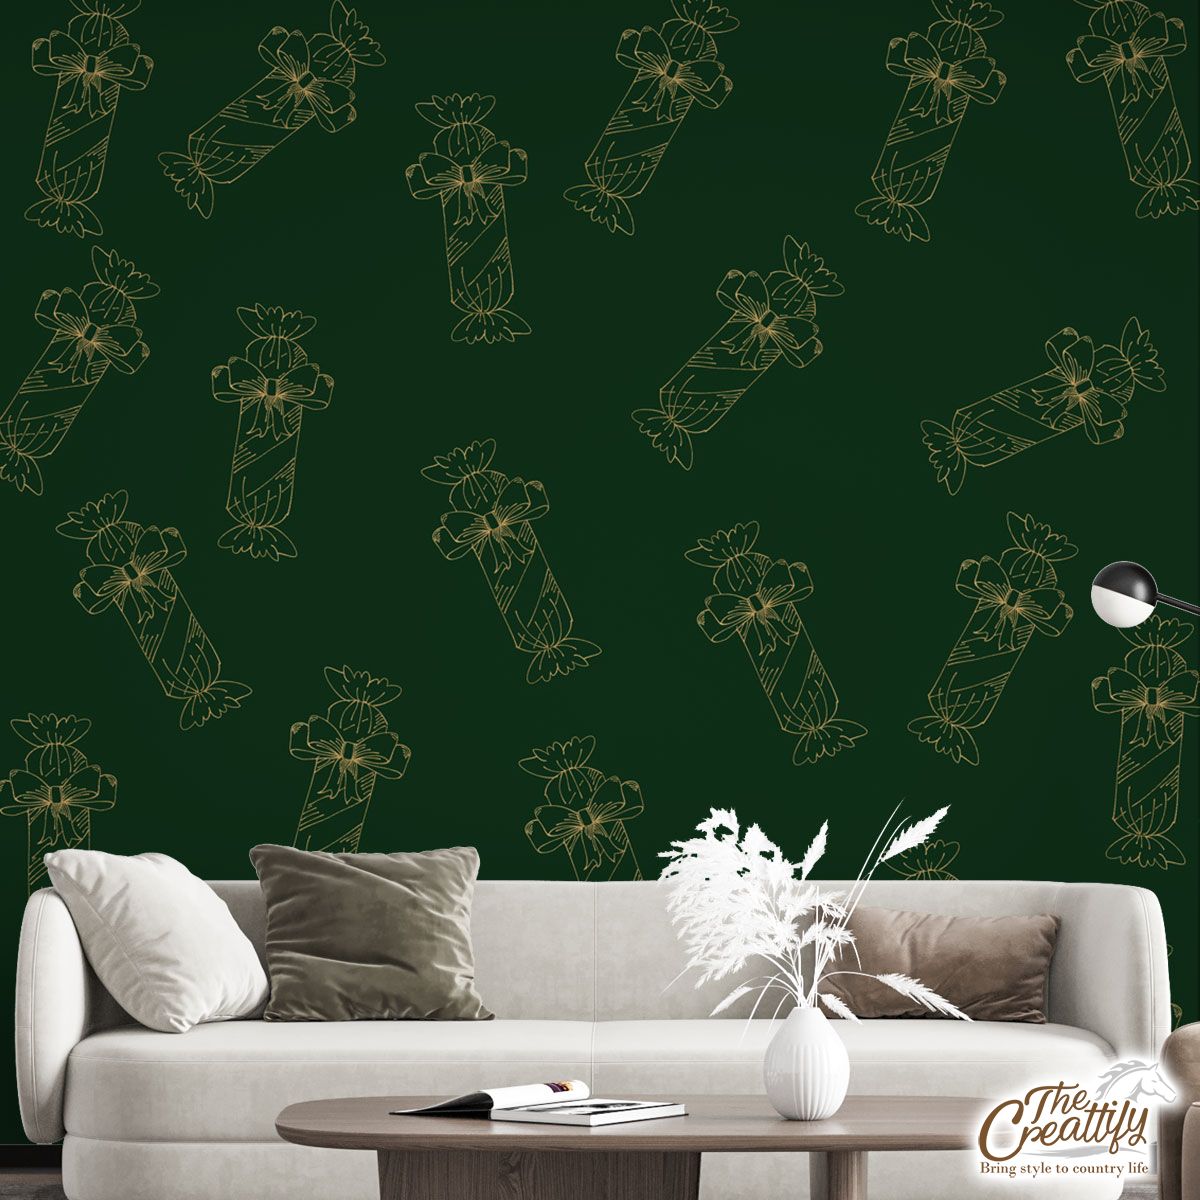 Gold And Green Christmas Candy Wall Mural